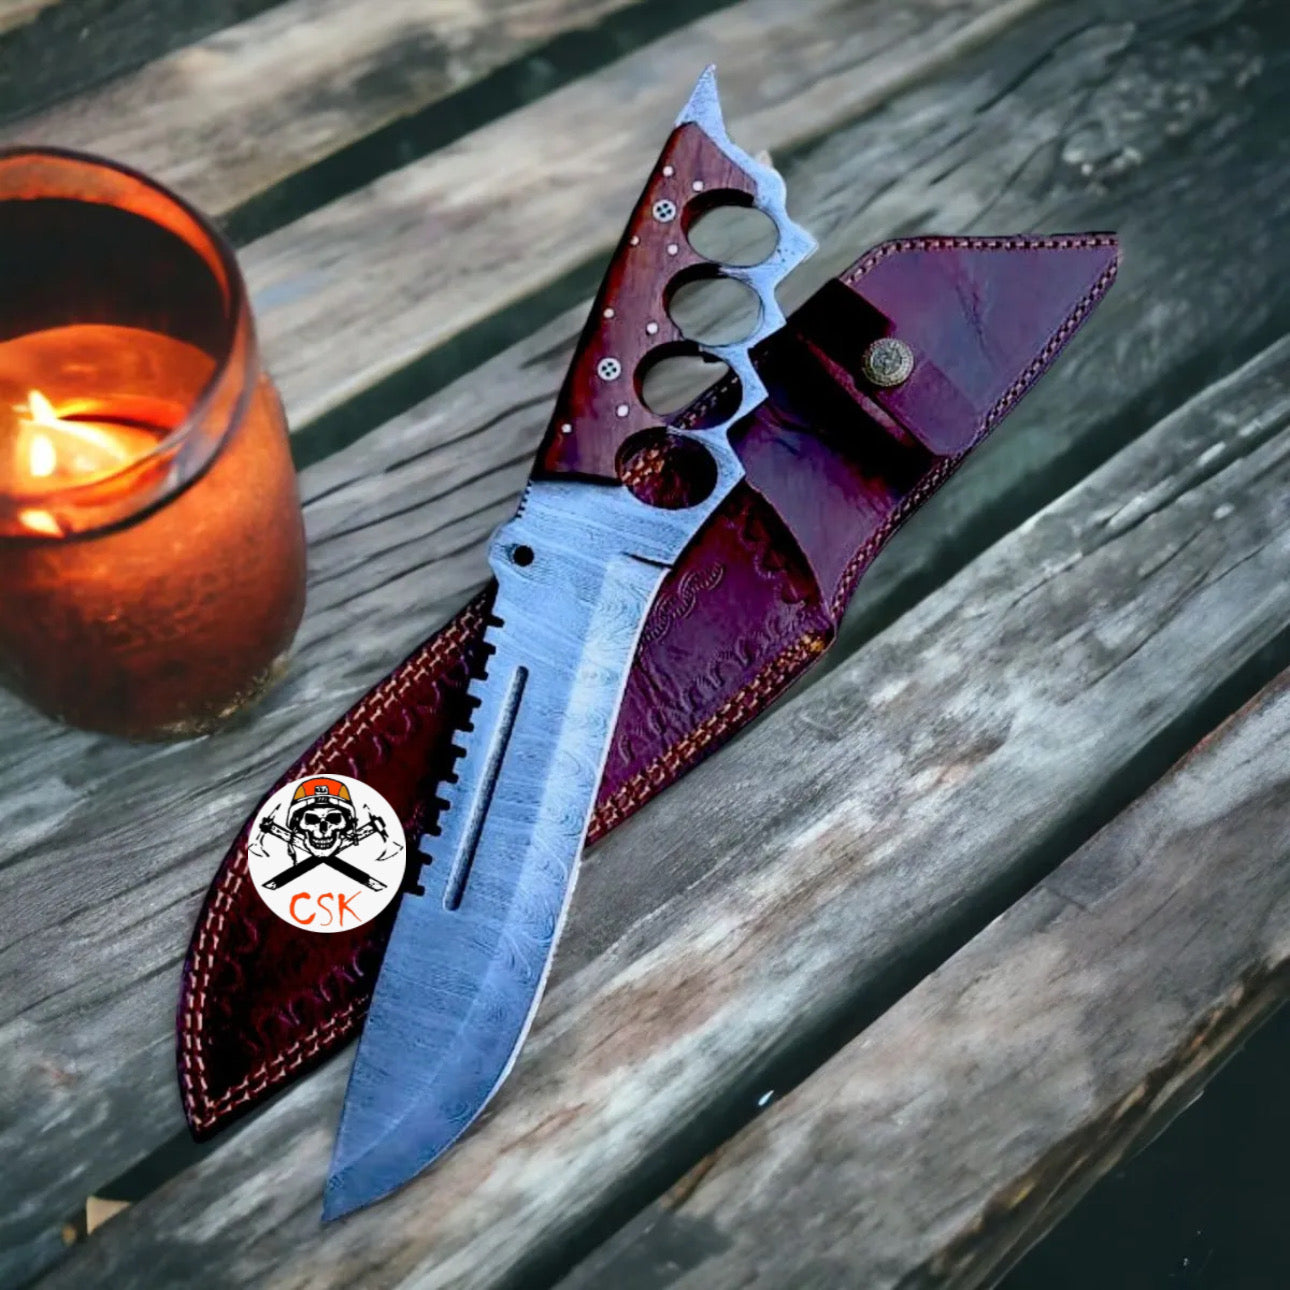 Handmade Damascus Tactical Knuckle Bowie Knife with Full Tang handle